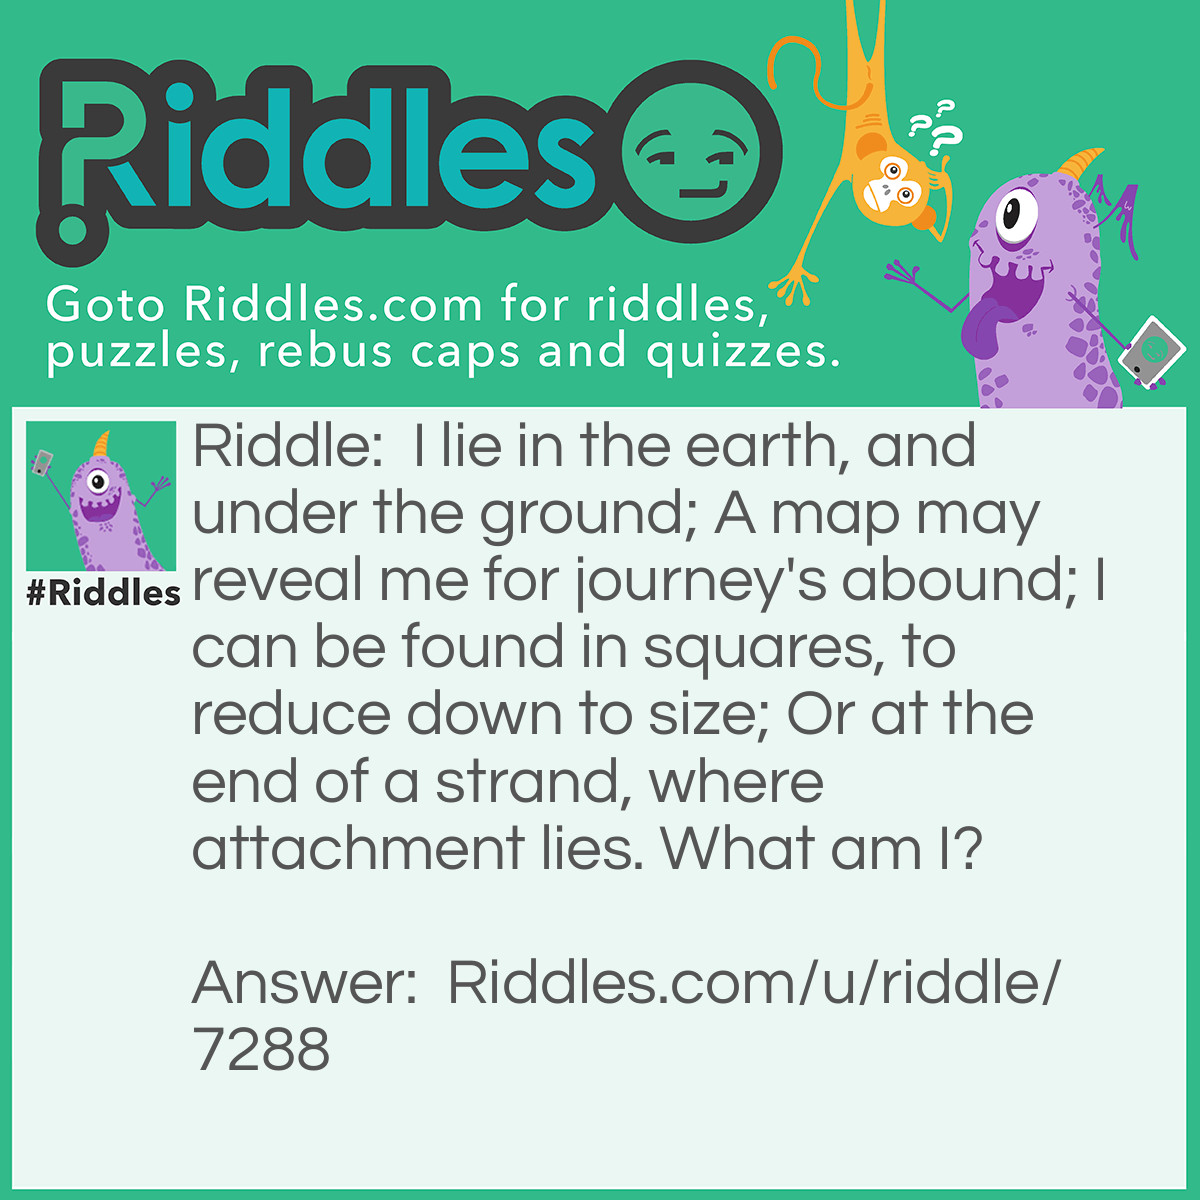 Riddle: I lie in the earth, and under the ground; A map may reveal me for journey's abound; I can be found in squares, to reduce down to size; Or at the end of a strand, where attachment lies. What am I? Answer: Roots